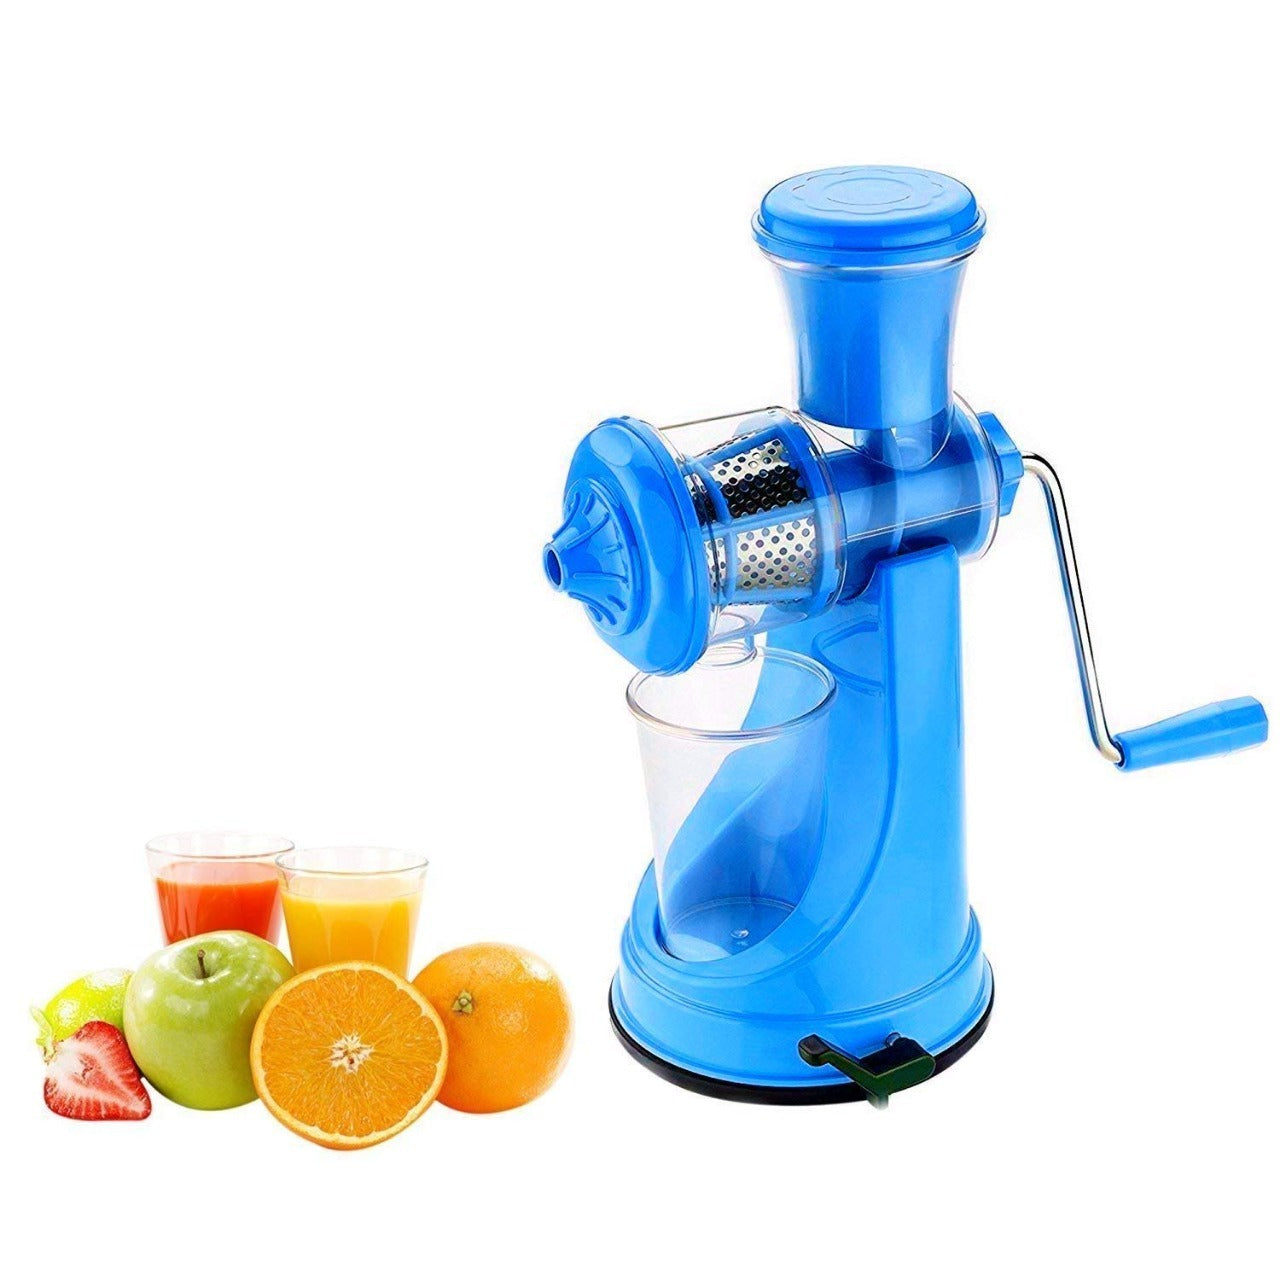 Manual Fruit Vegetable Juicer with Strainer (Multicolour)